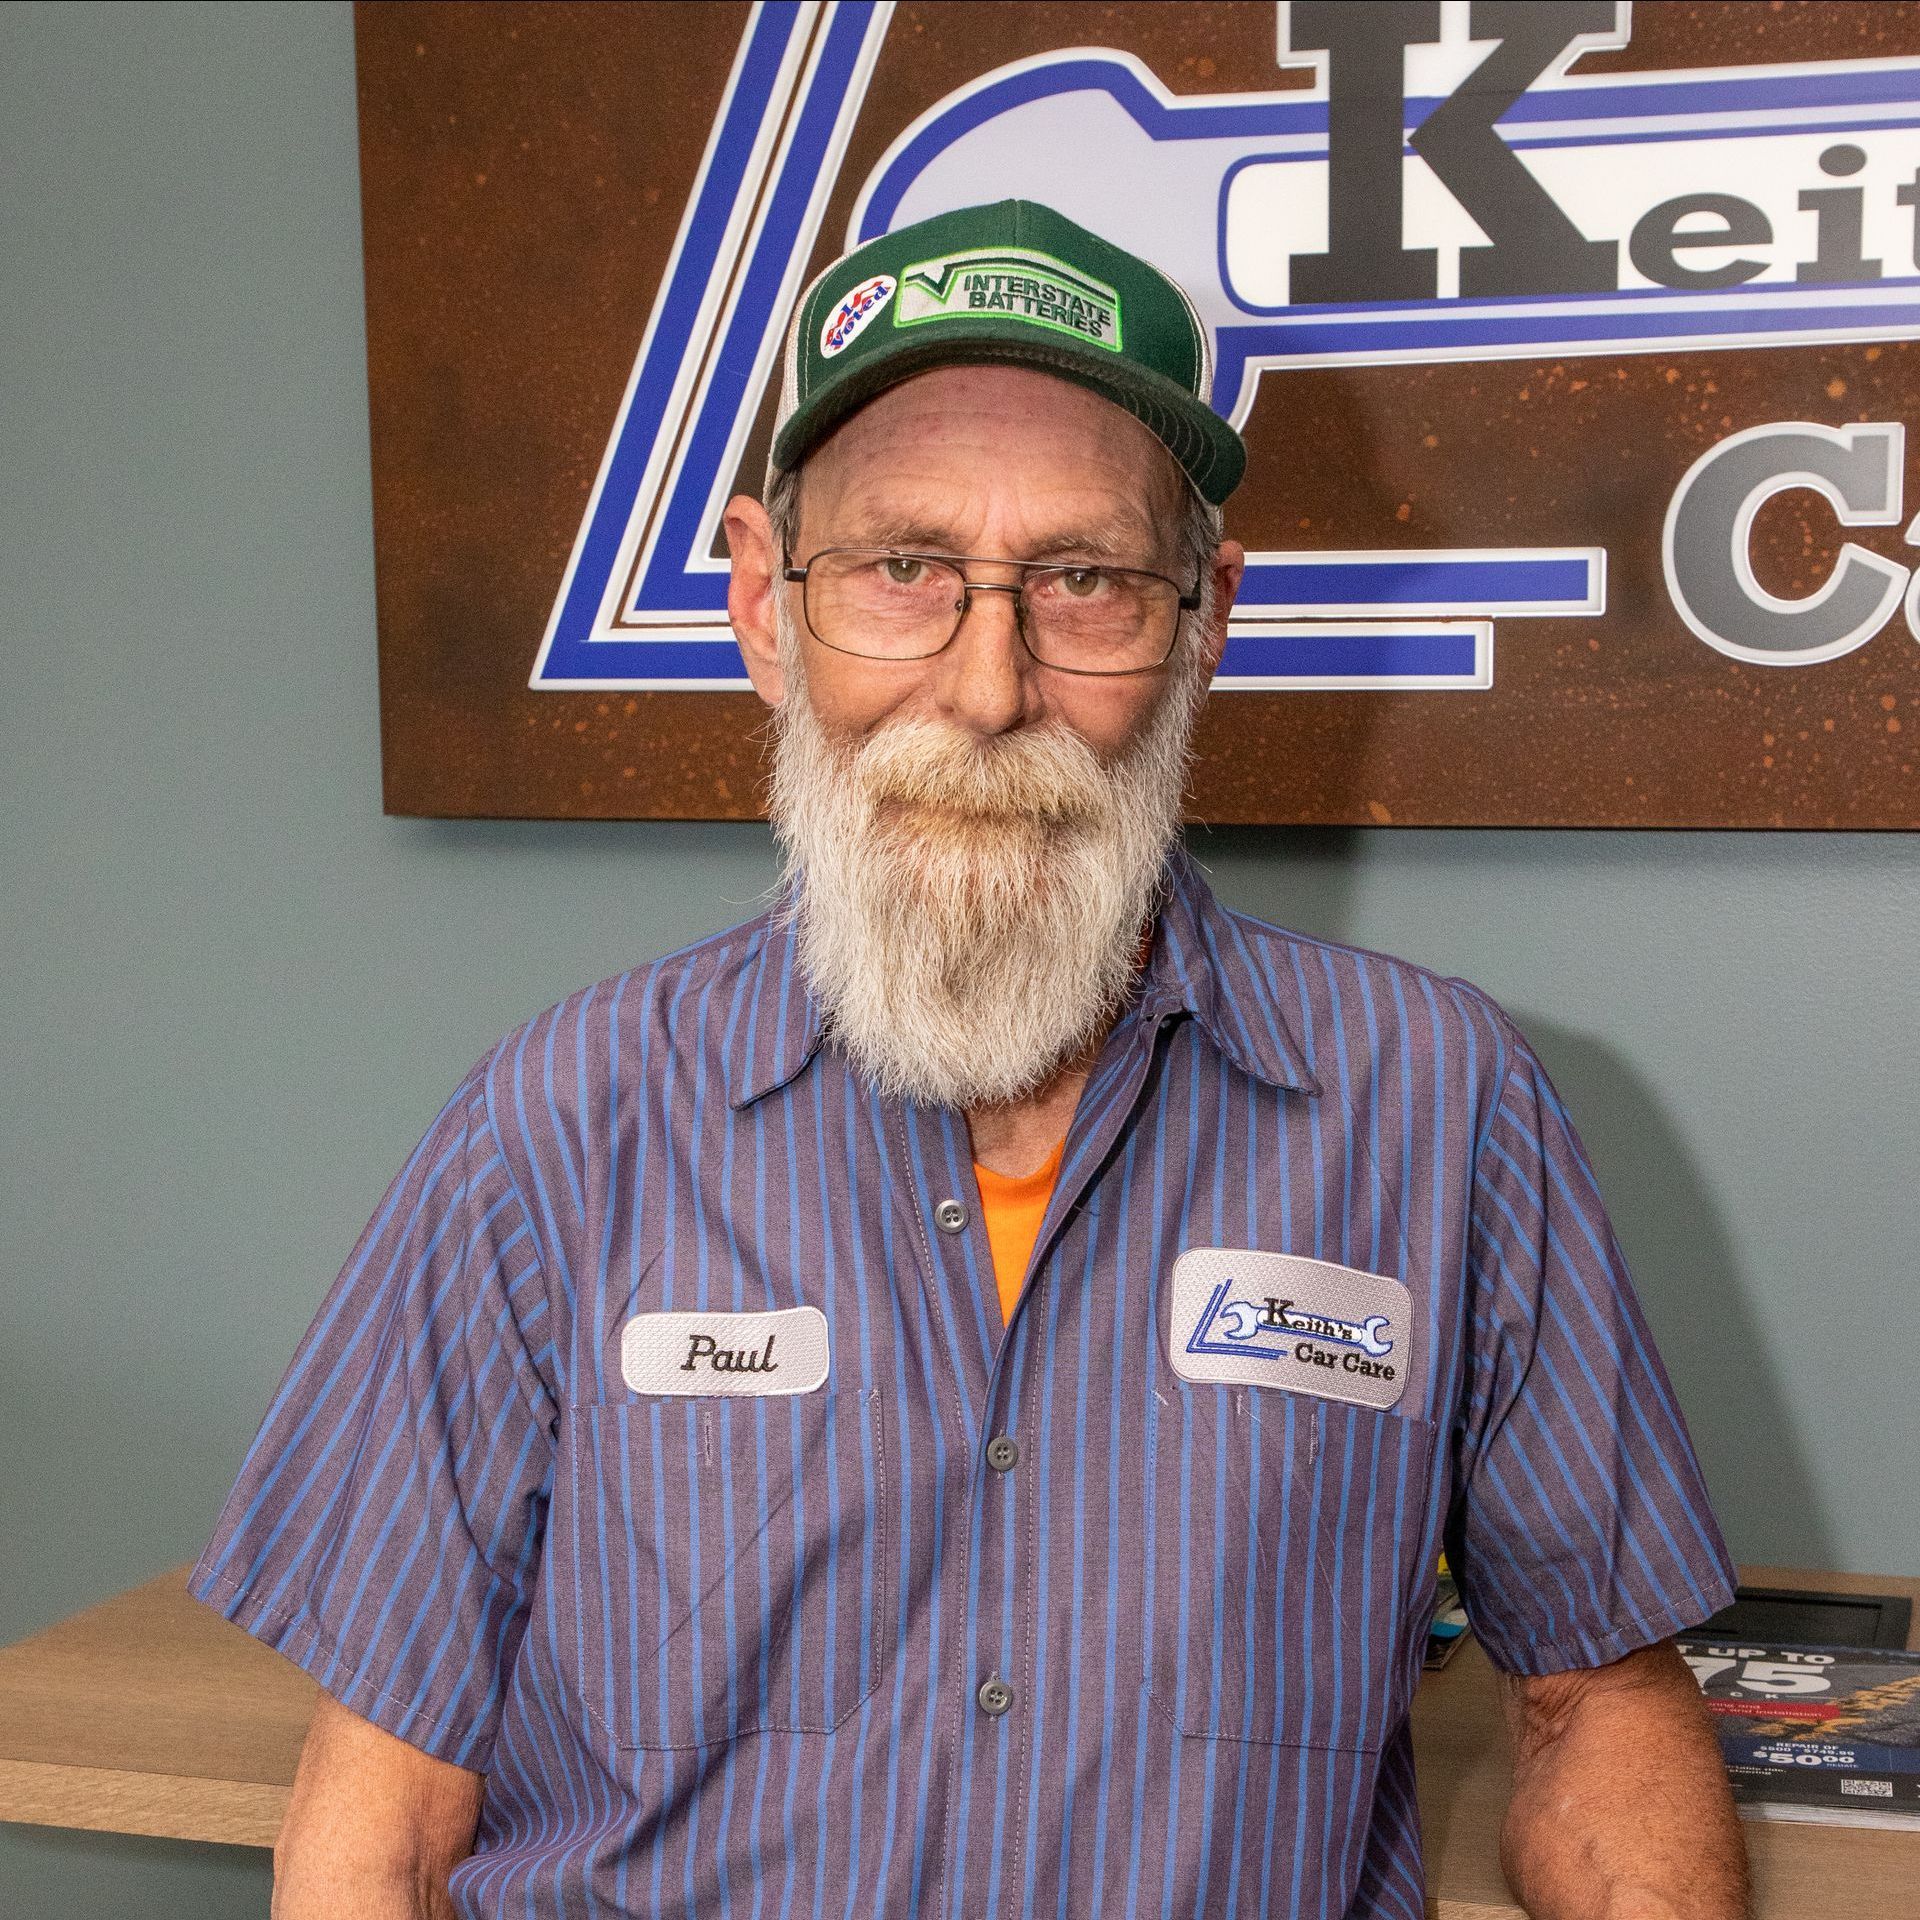 Paul B at Keith's Car Care in Oswego, IL